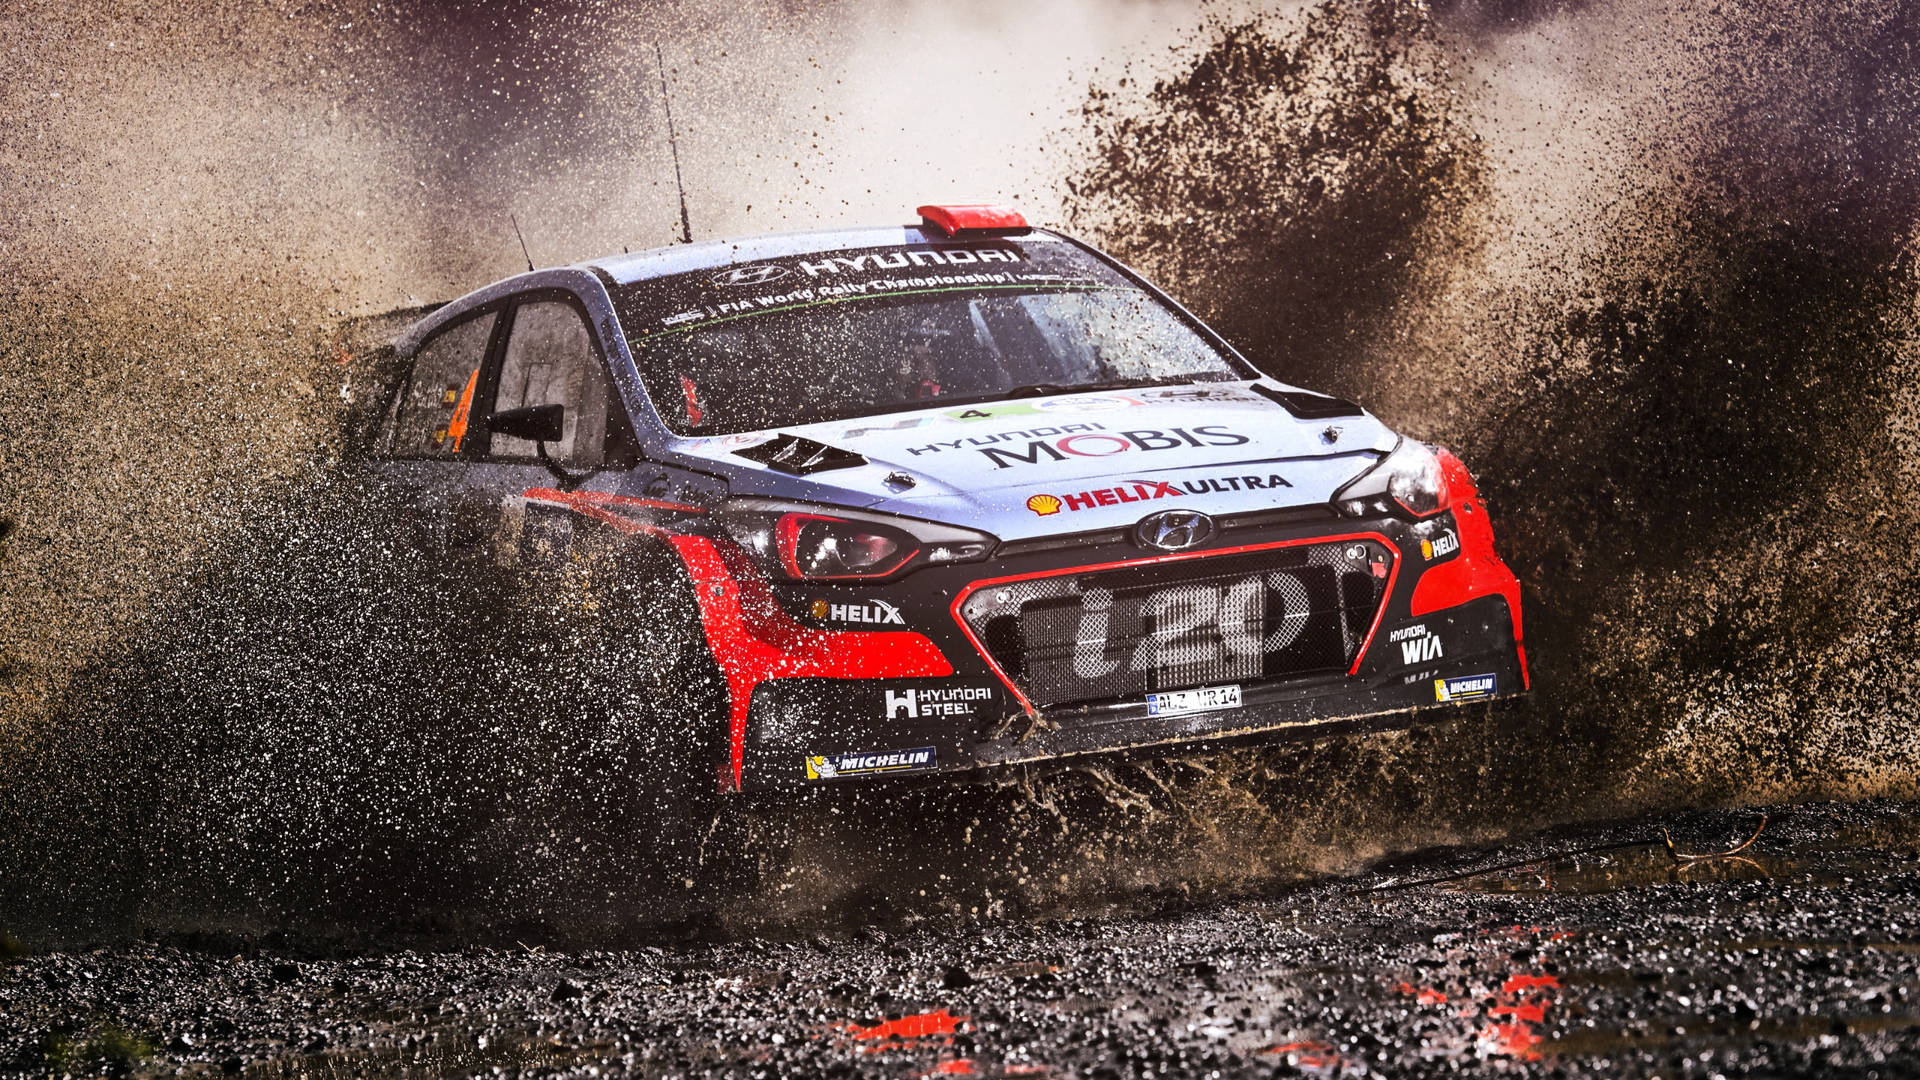 Adrenaline Packed Action - Racing Car Conquering A Muddy Road Background